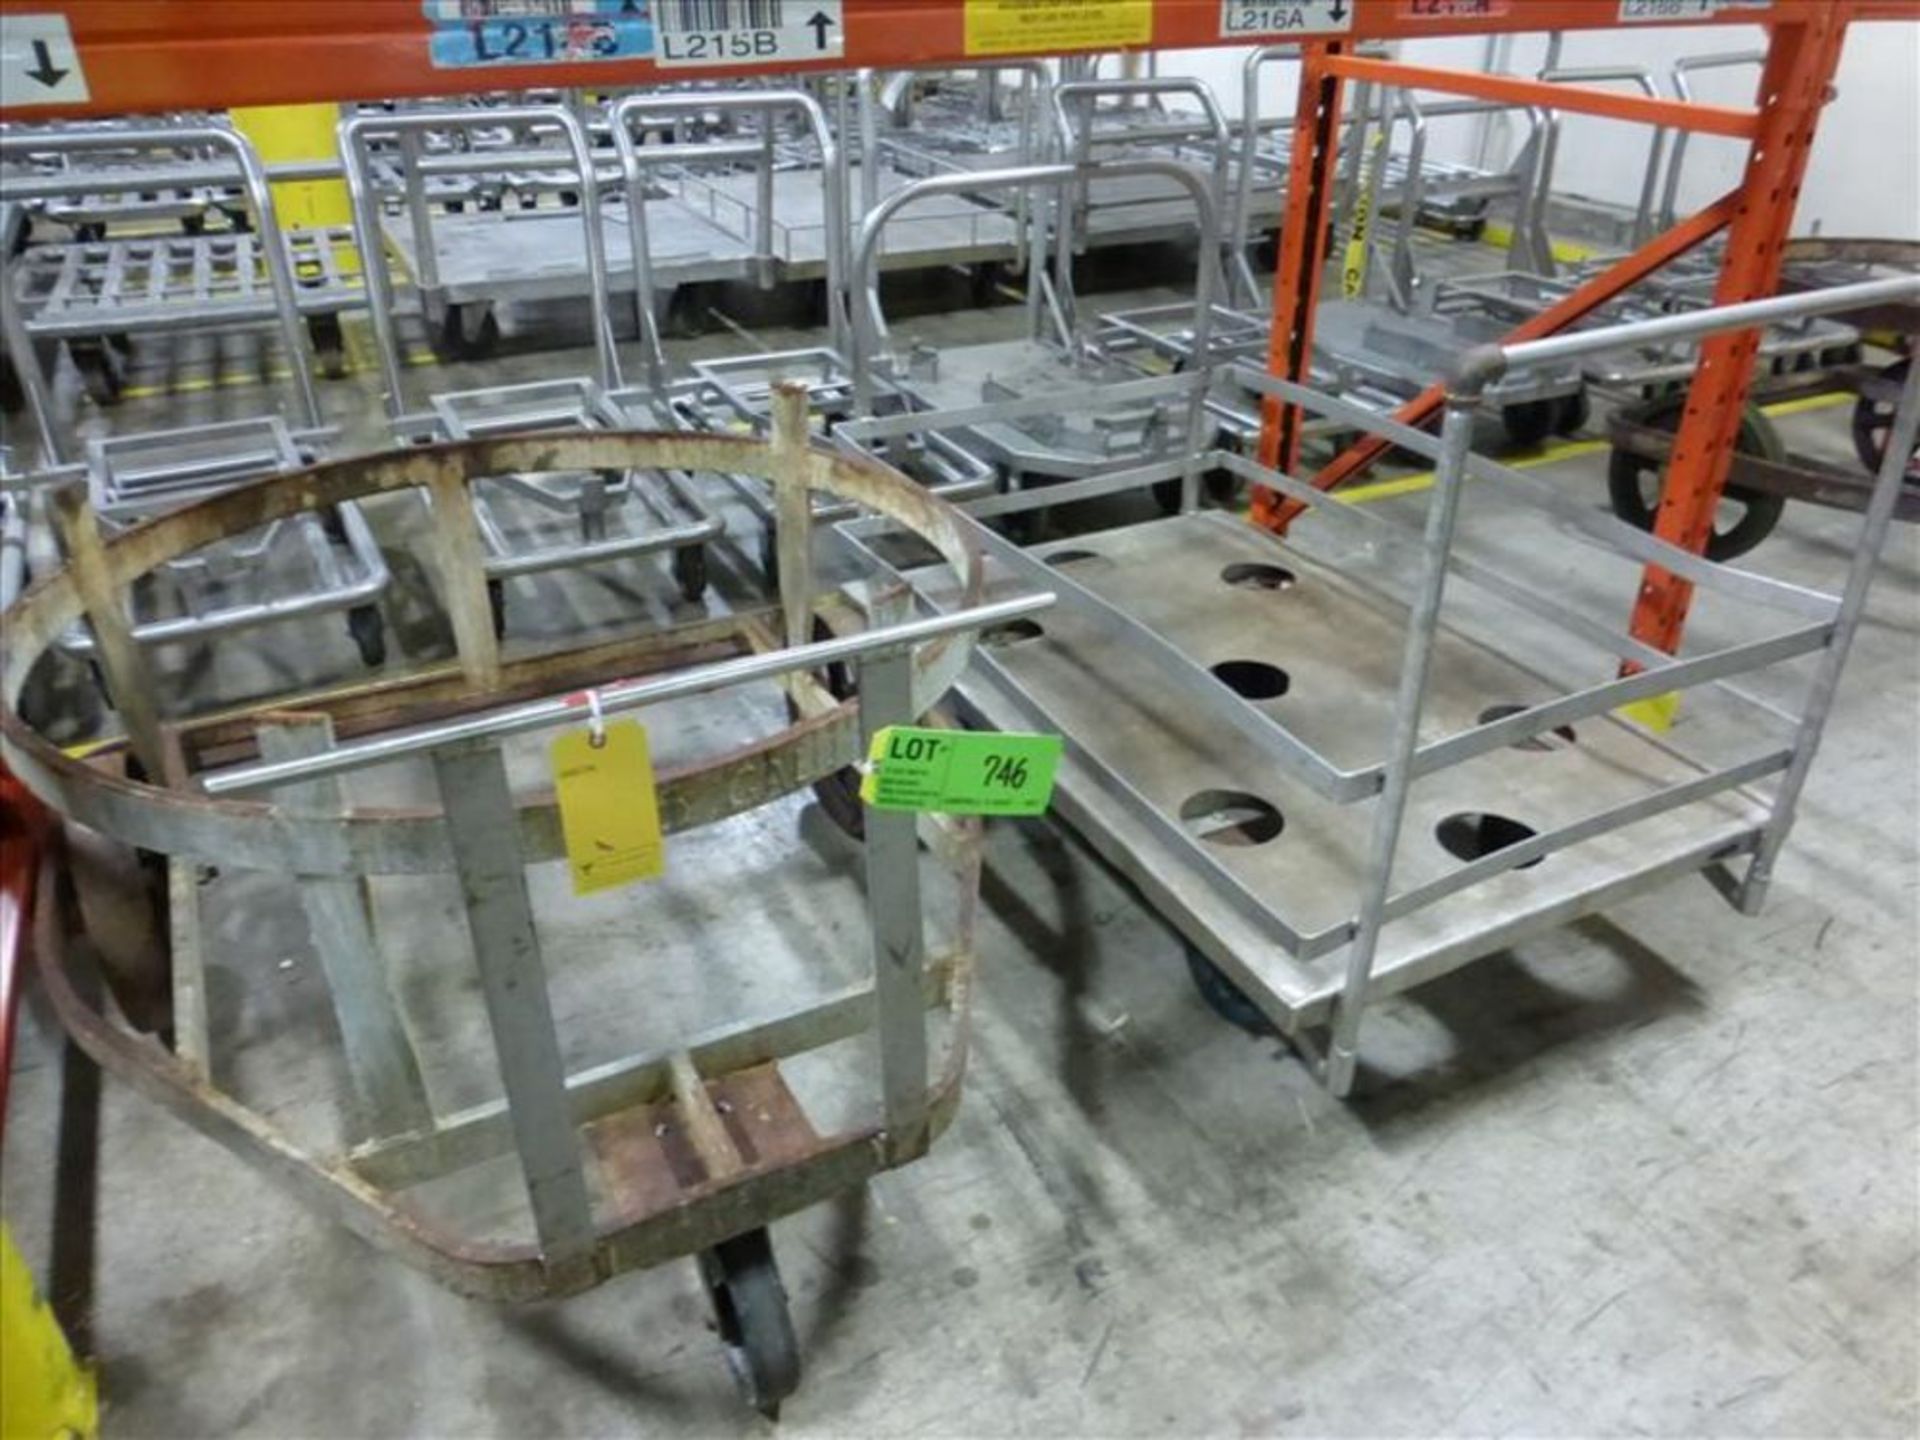 (2) Soup Dolly, (1) Stainless Cart, including tarps, lighting fixtures, steel plates [2nd Flr Cage - Image 7 of 7